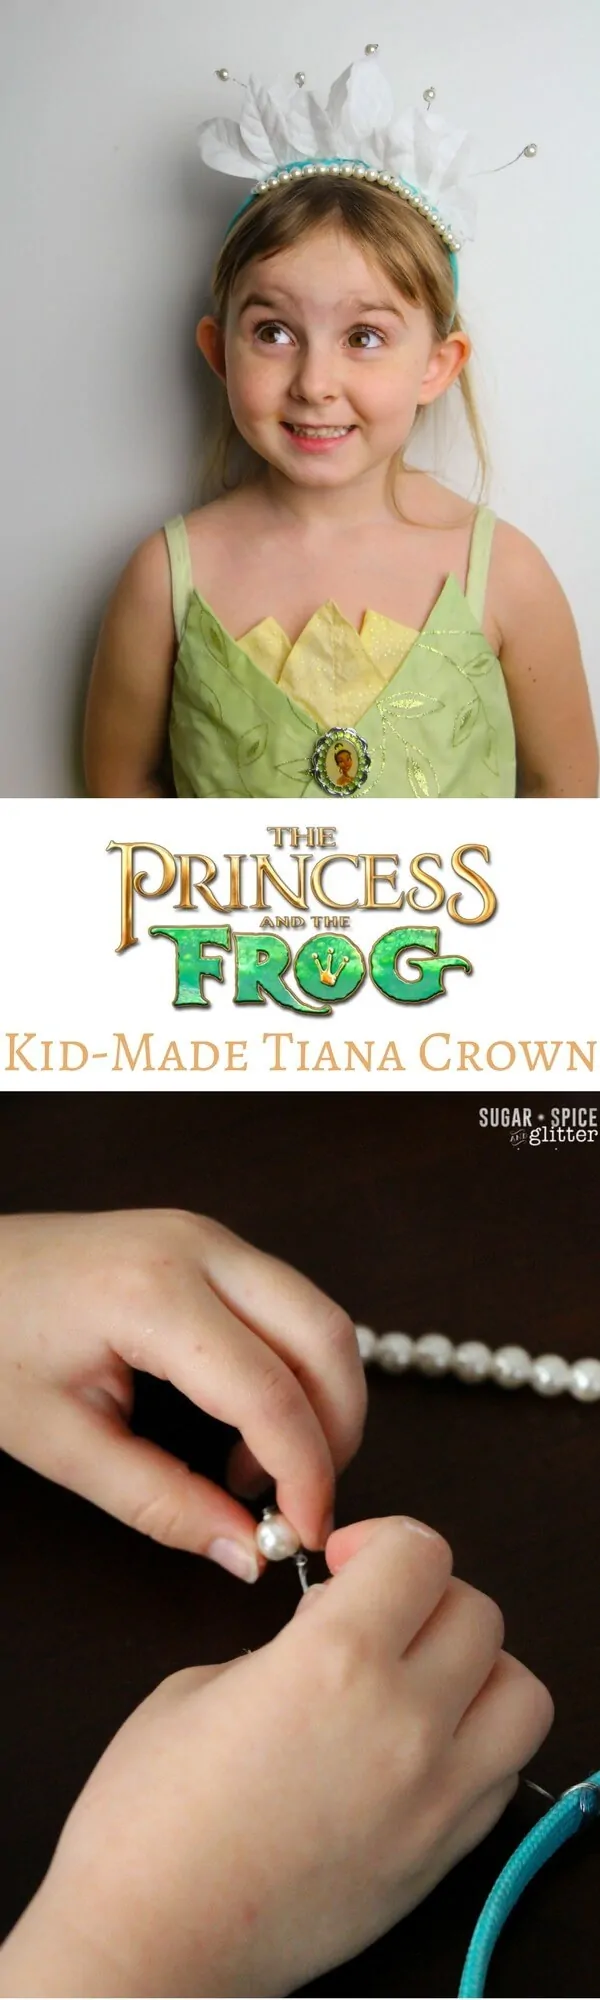 How to make a quick and easy Princess Tiana tiara headband from the Disney movie The Princess and the Frog. This cute Disney craft is a the perfect touch to a Princess Tiana costume or Disneybounding outfit